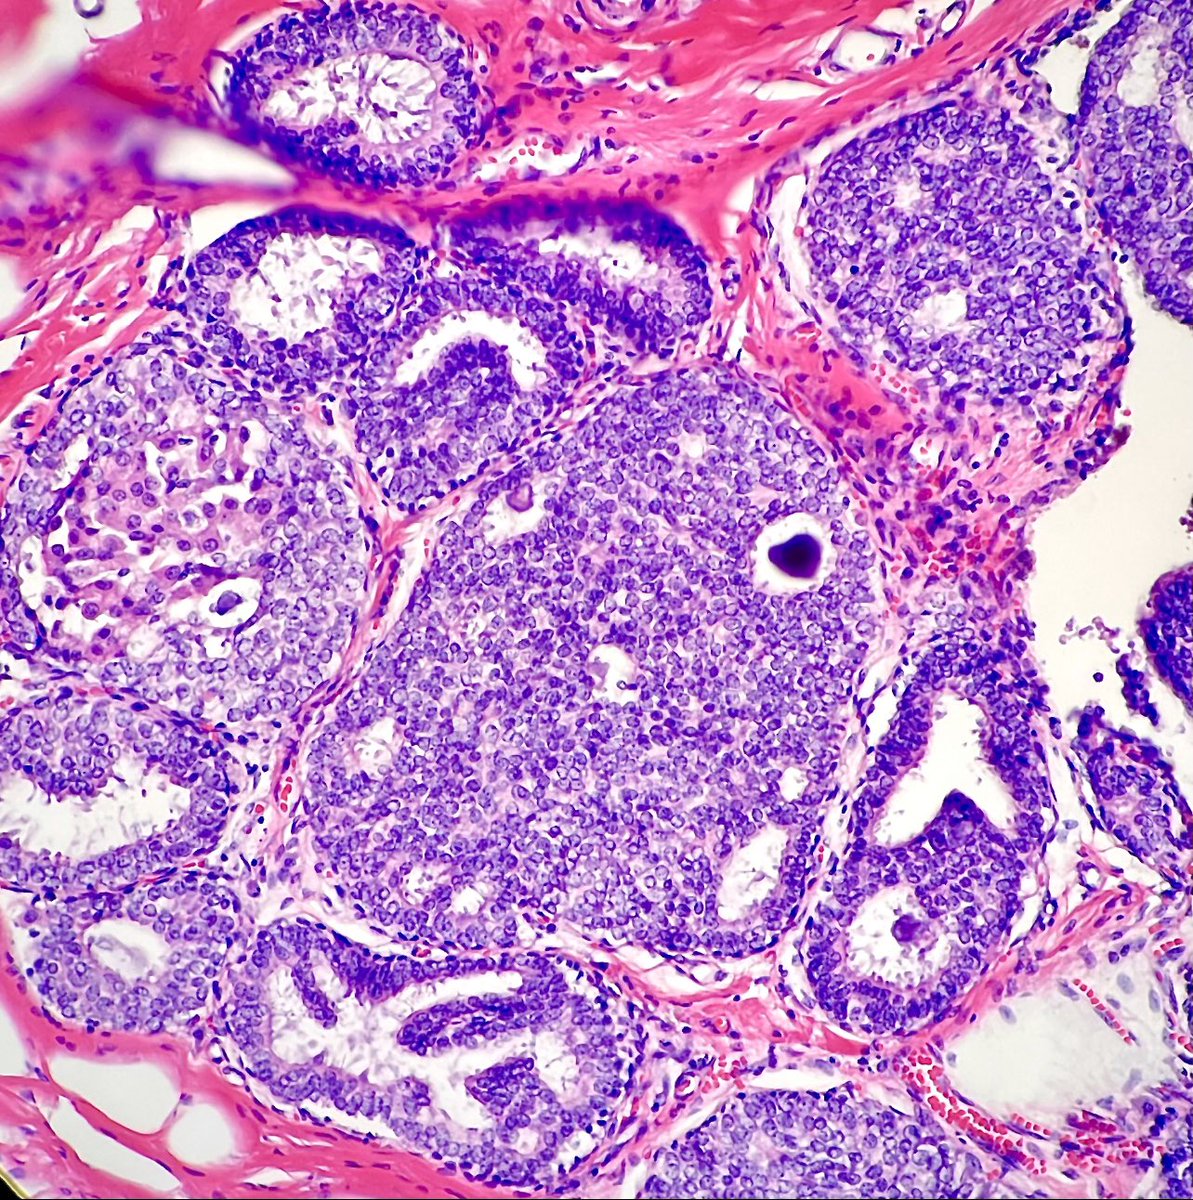 What do you see in this DCIS? #PathTwitter #MedTwitter #pathresidents #breastpath #breastbiopsy 🙄🙄